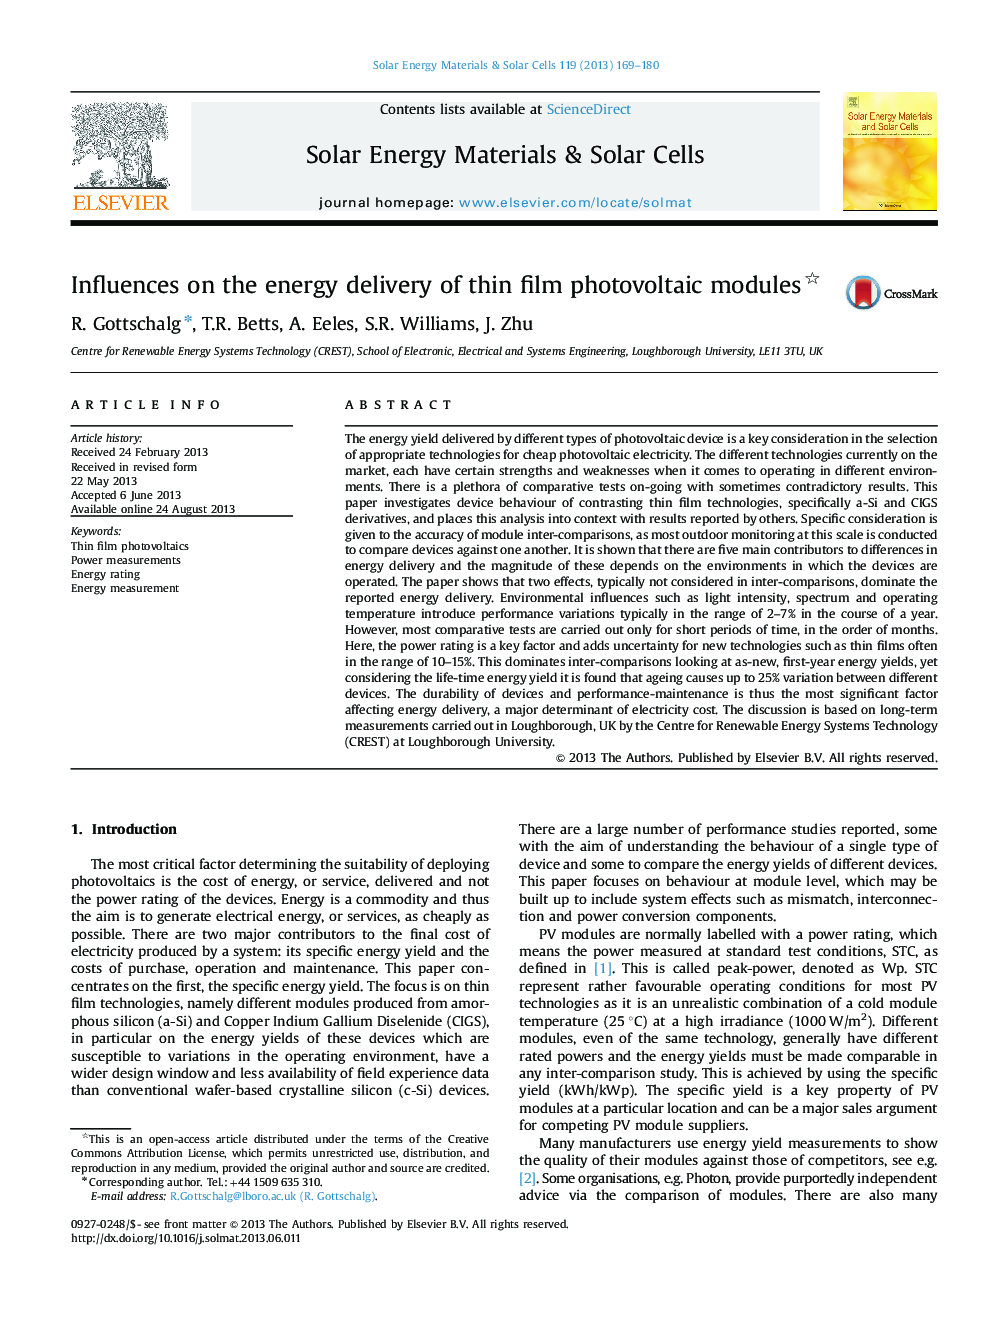 Influences on the energy delivery of thin film photovoltaic modules